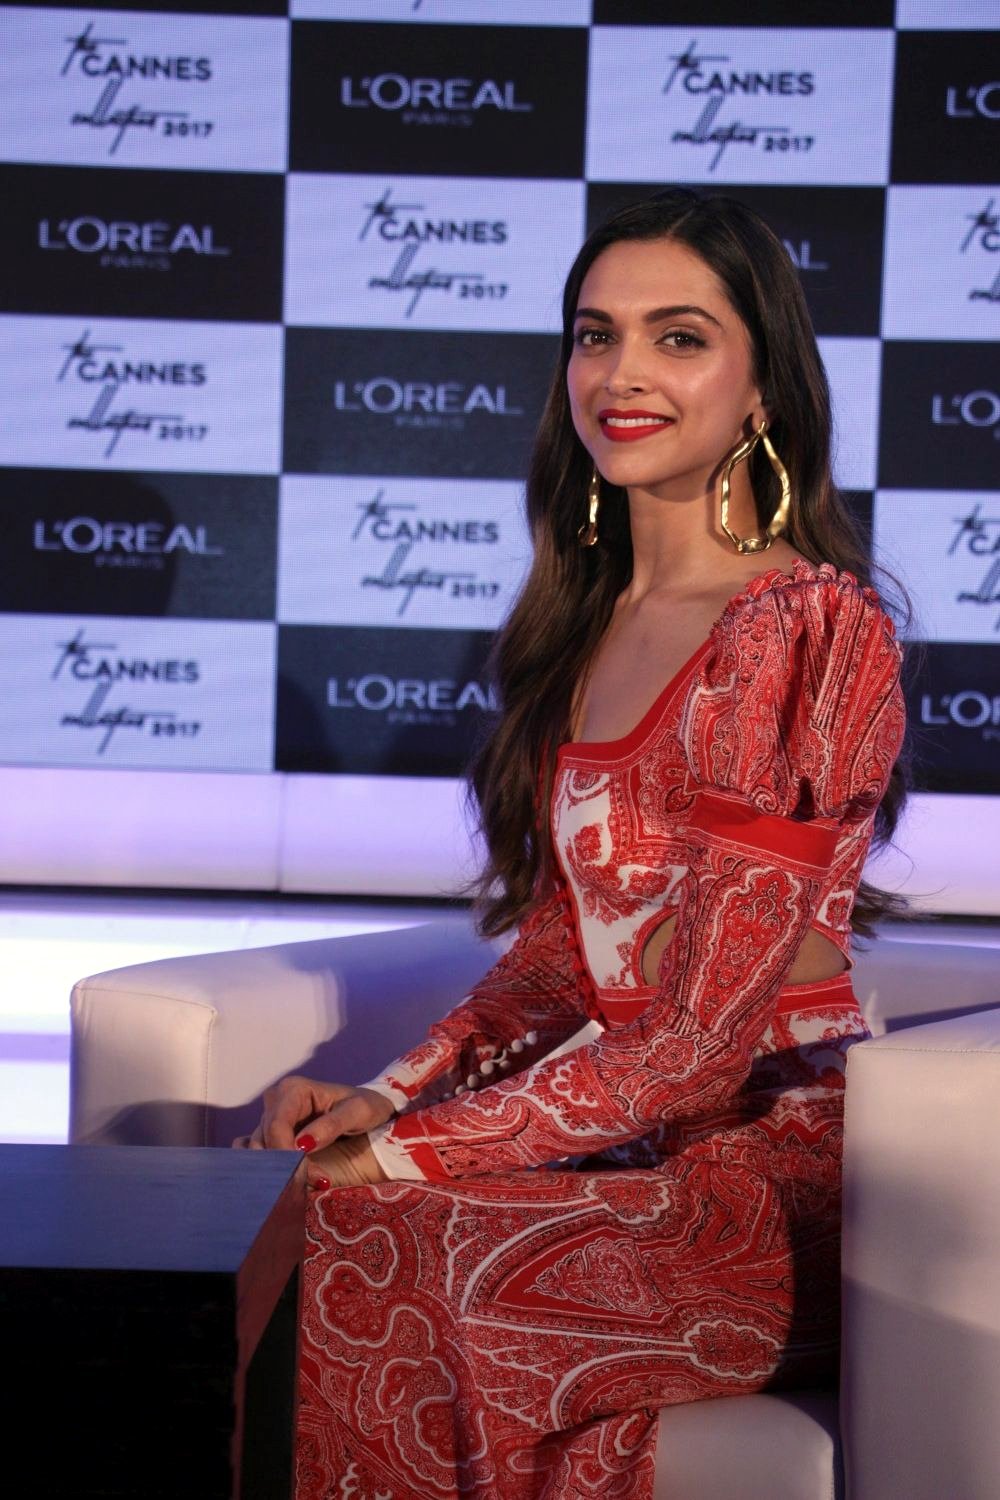 Deepika Padukone Looks as She unveils L'oreal Paris Cannes Collection 2017